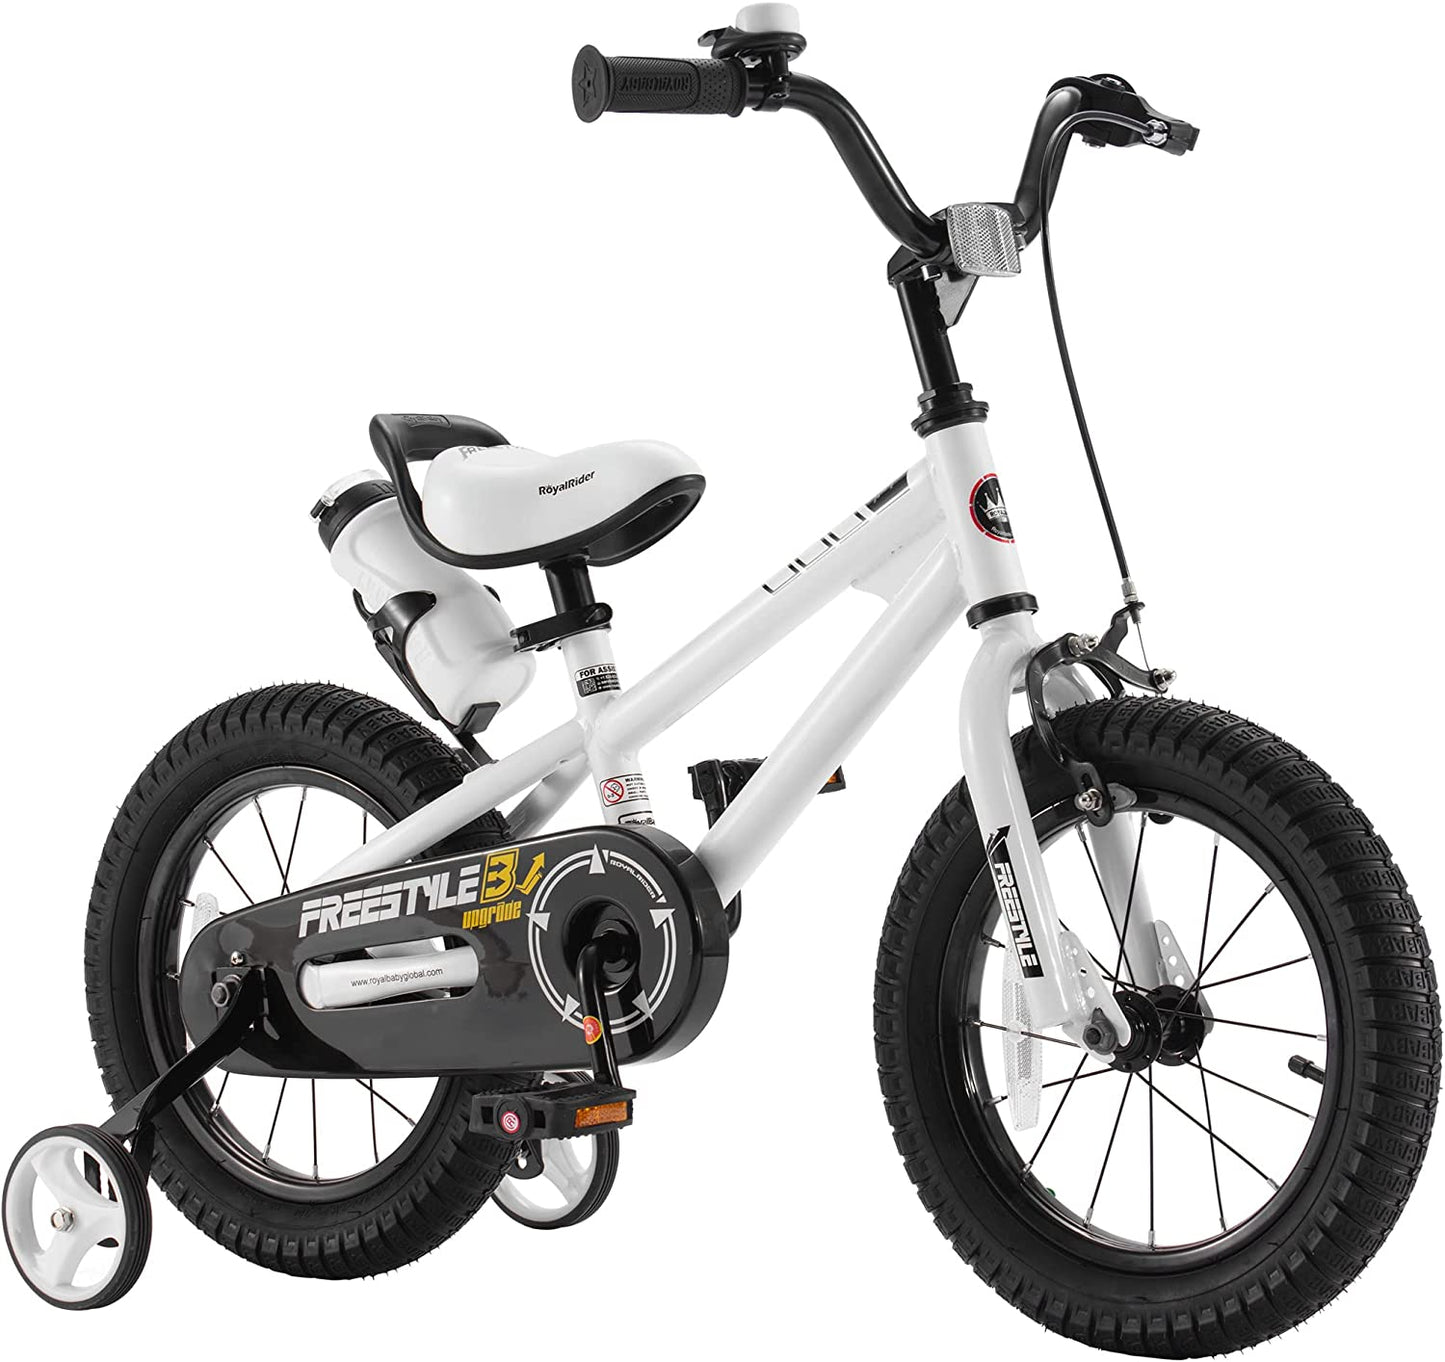 Freestyle Kids Bike 12 14 16 18 Inch Bicycle for Boys Girls Ages 3-9 Years, Multiple Colors